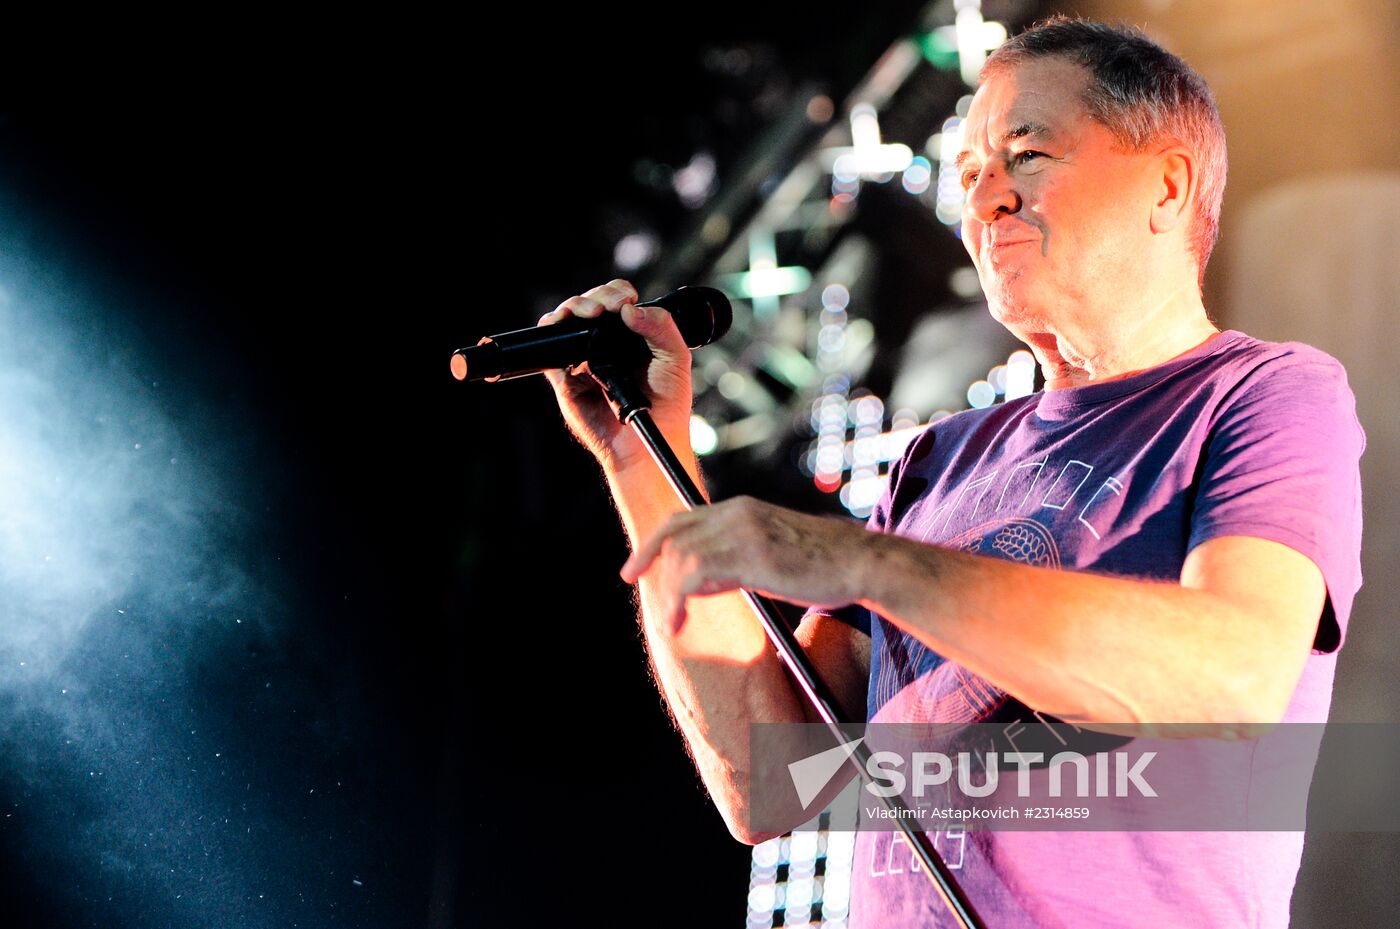 Concert by rock group Deep Purple in Olympic sports complex